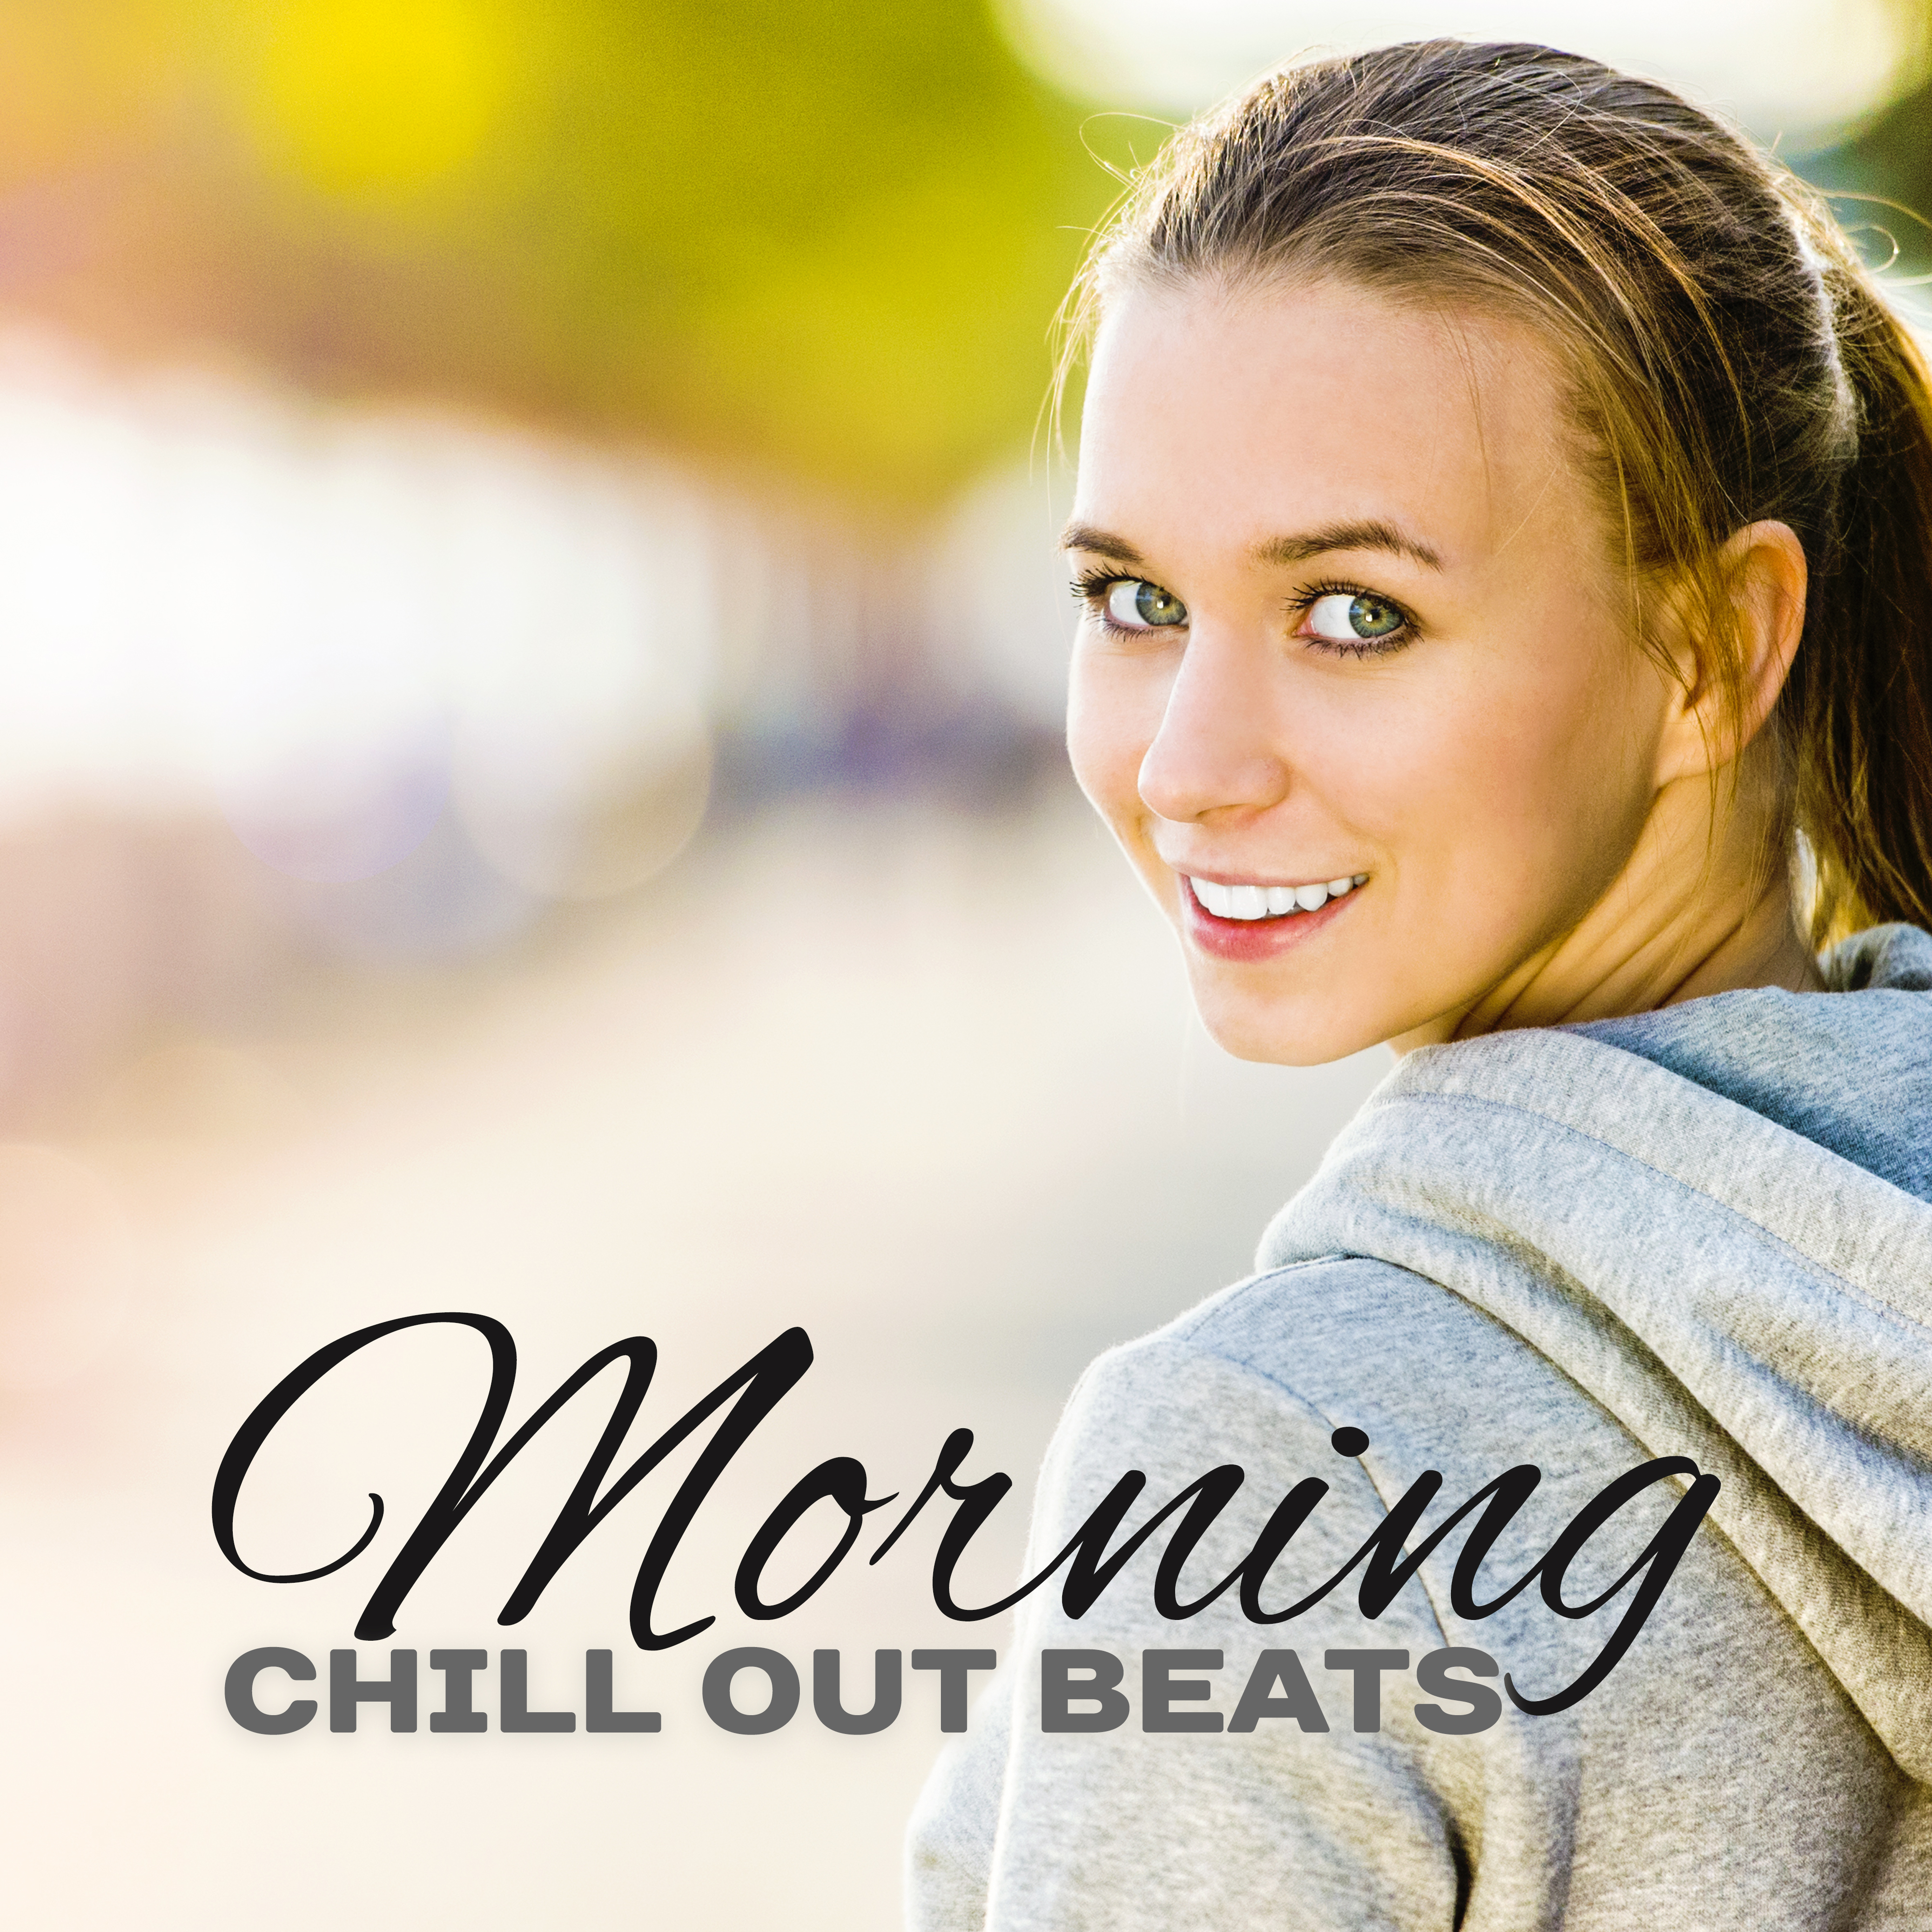 Morning Chill Out Beats  Rest Music, Sunrise Chillout, Beach Relaxation, Morning Waves, Summer Sounds